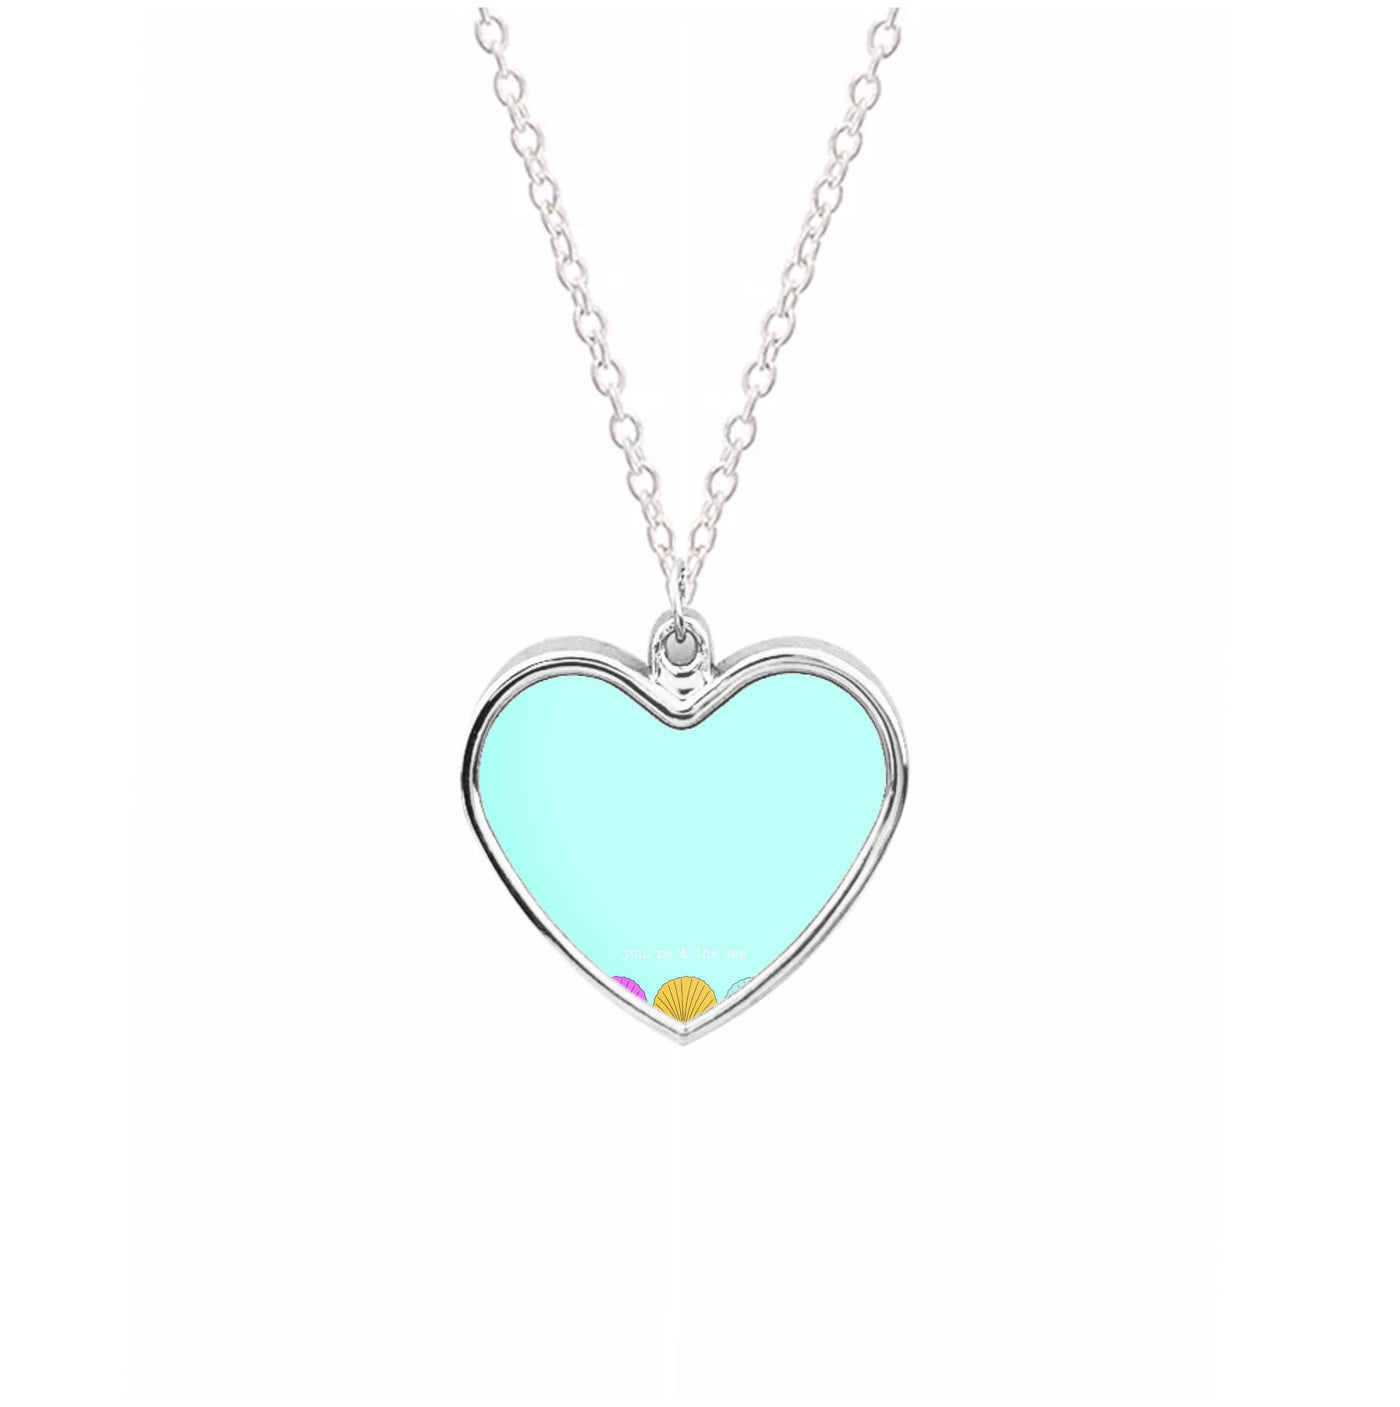 You, Me And The Sea - Seashells Necklace